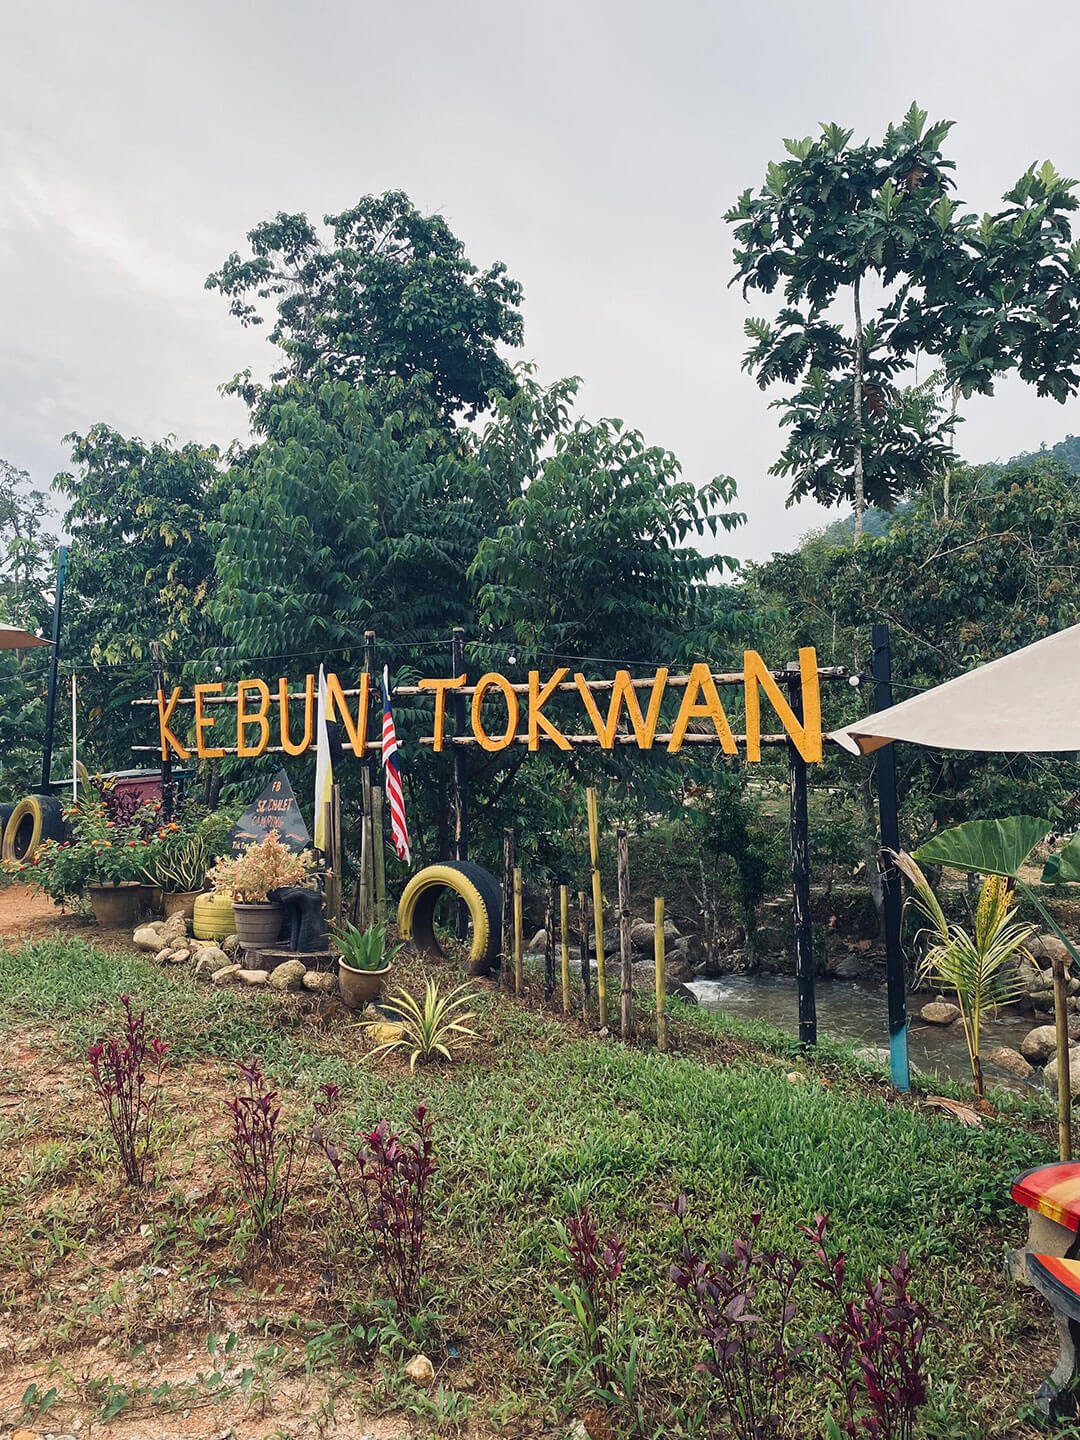 SZ Chalet and Camping (Kebun Tokwan) offers camping lots and chalets that have a lot of facilities to make your stay here an enjoyable one.